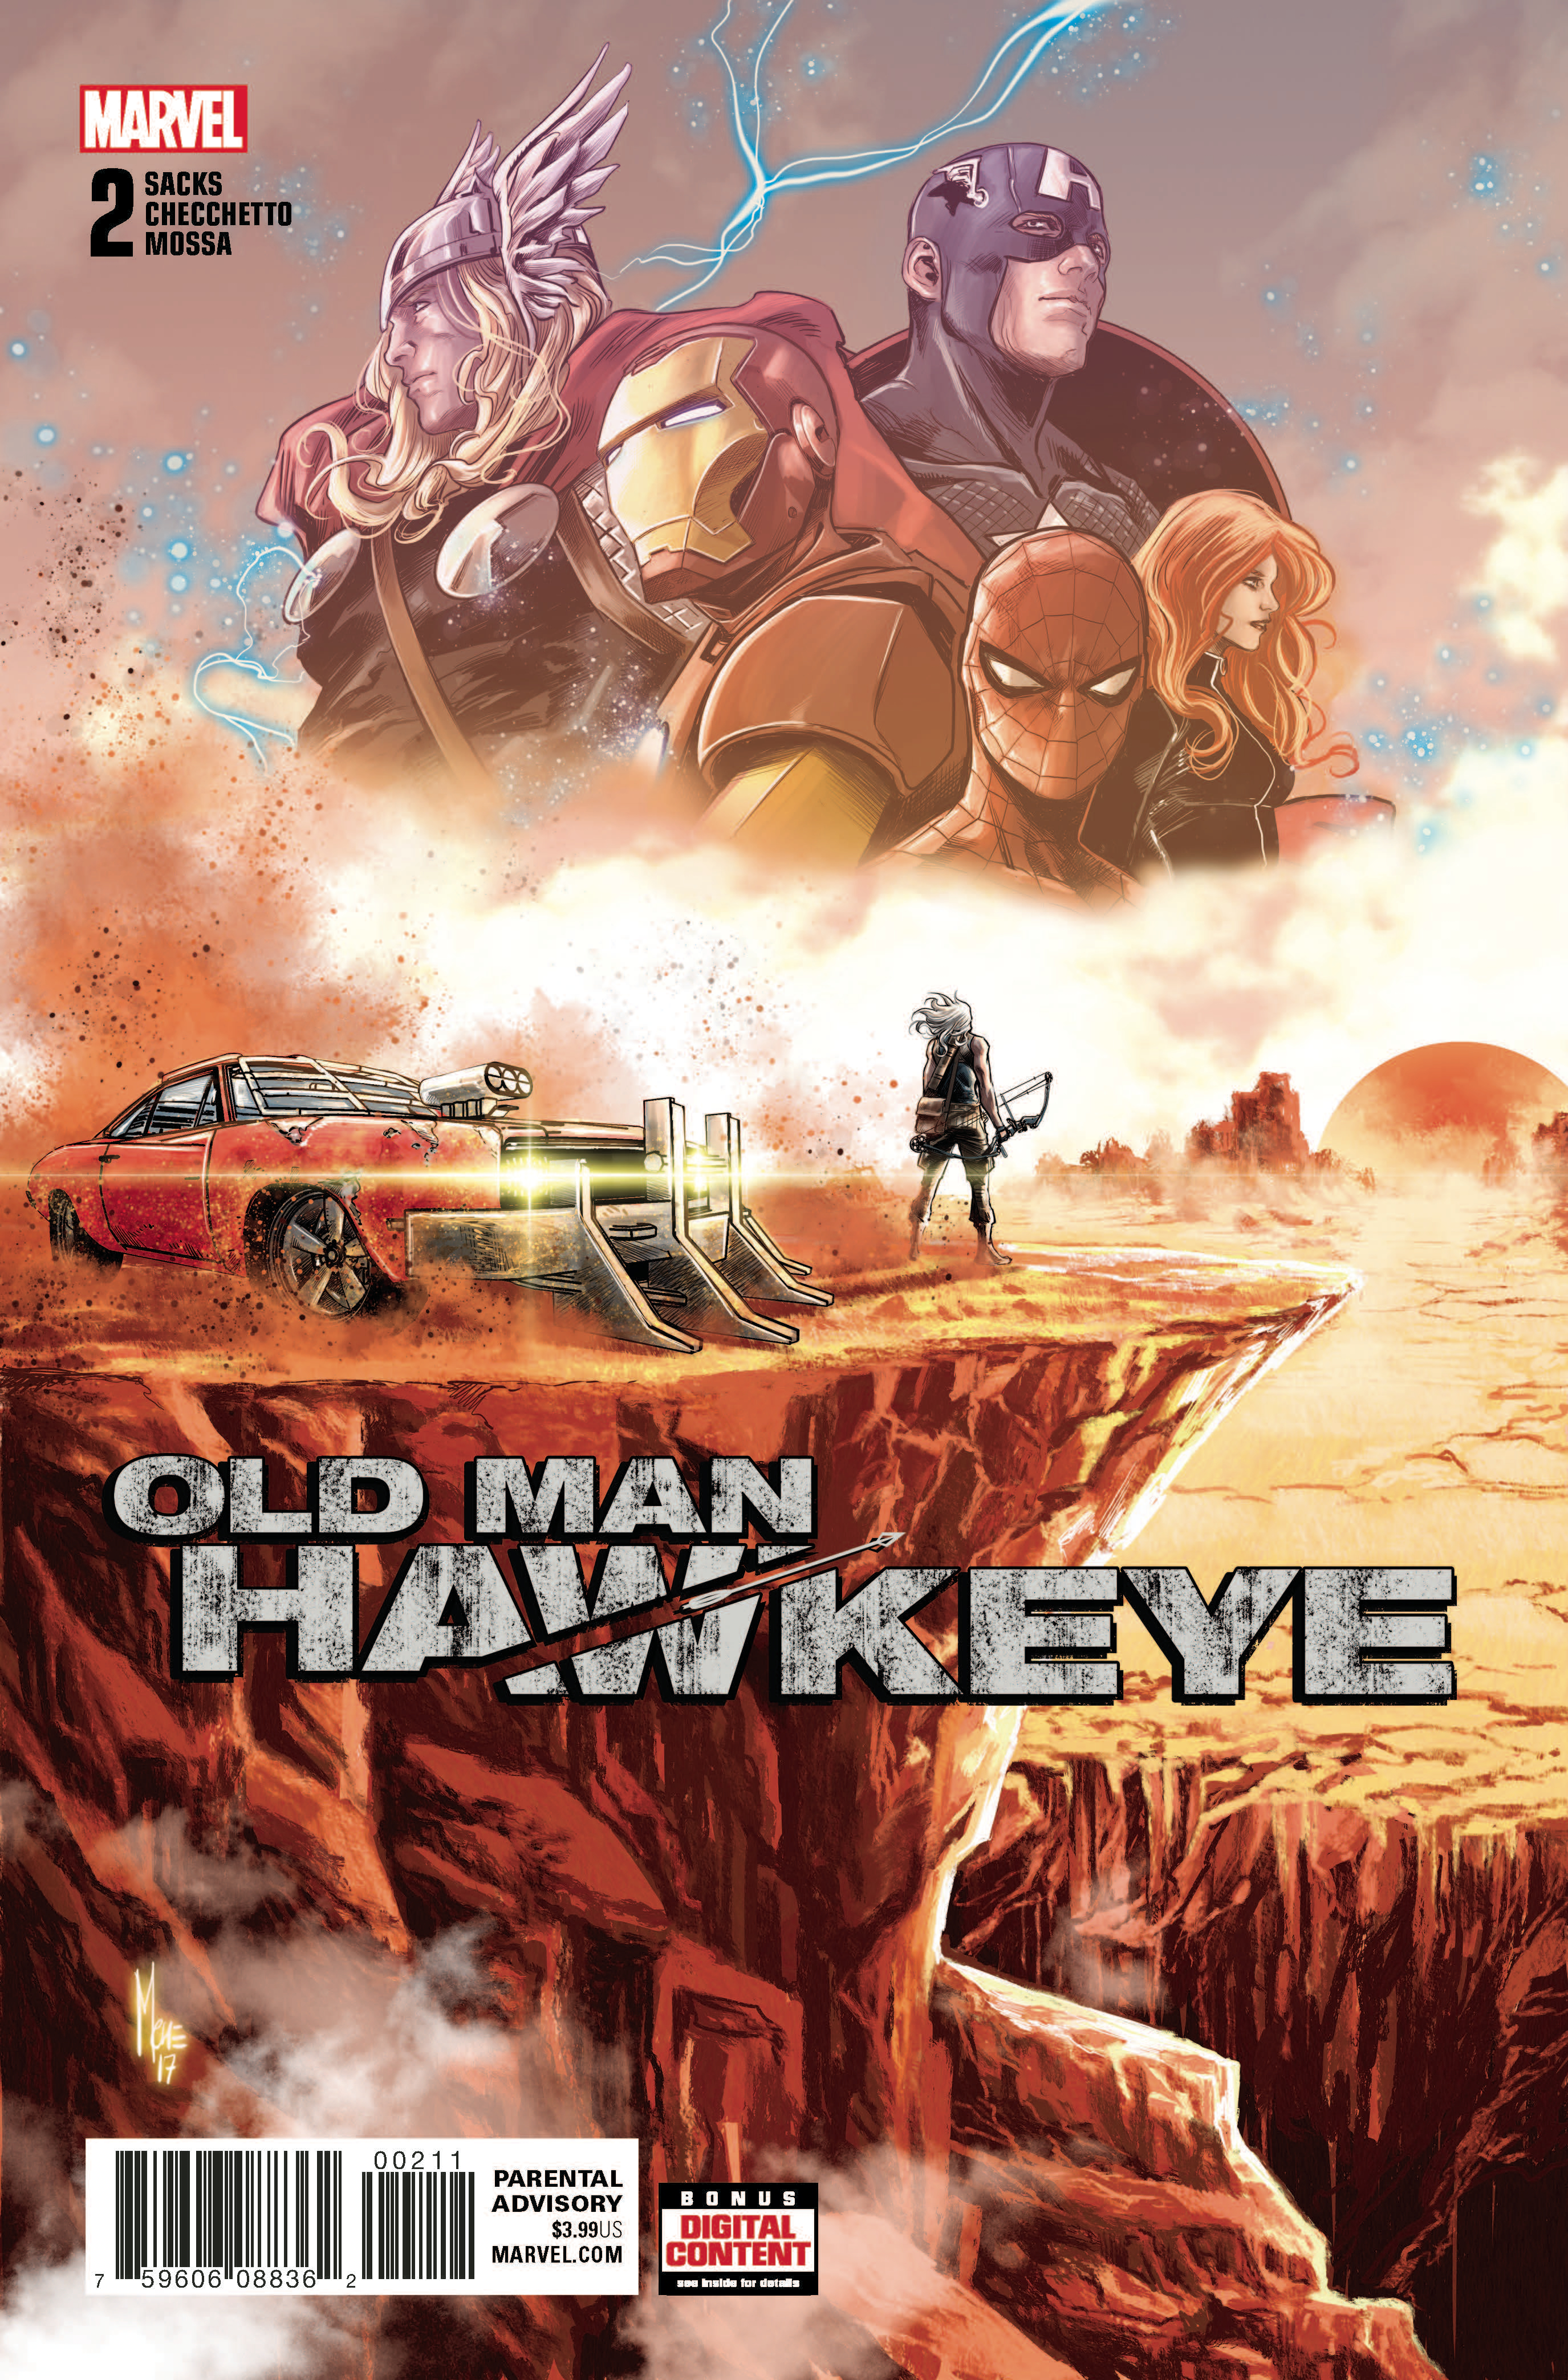 OLD MAN HAWKEYE VOLUME 2 THE WHOLE WORLD BLIND GRAPHIC NOVEL Collects #7-12 